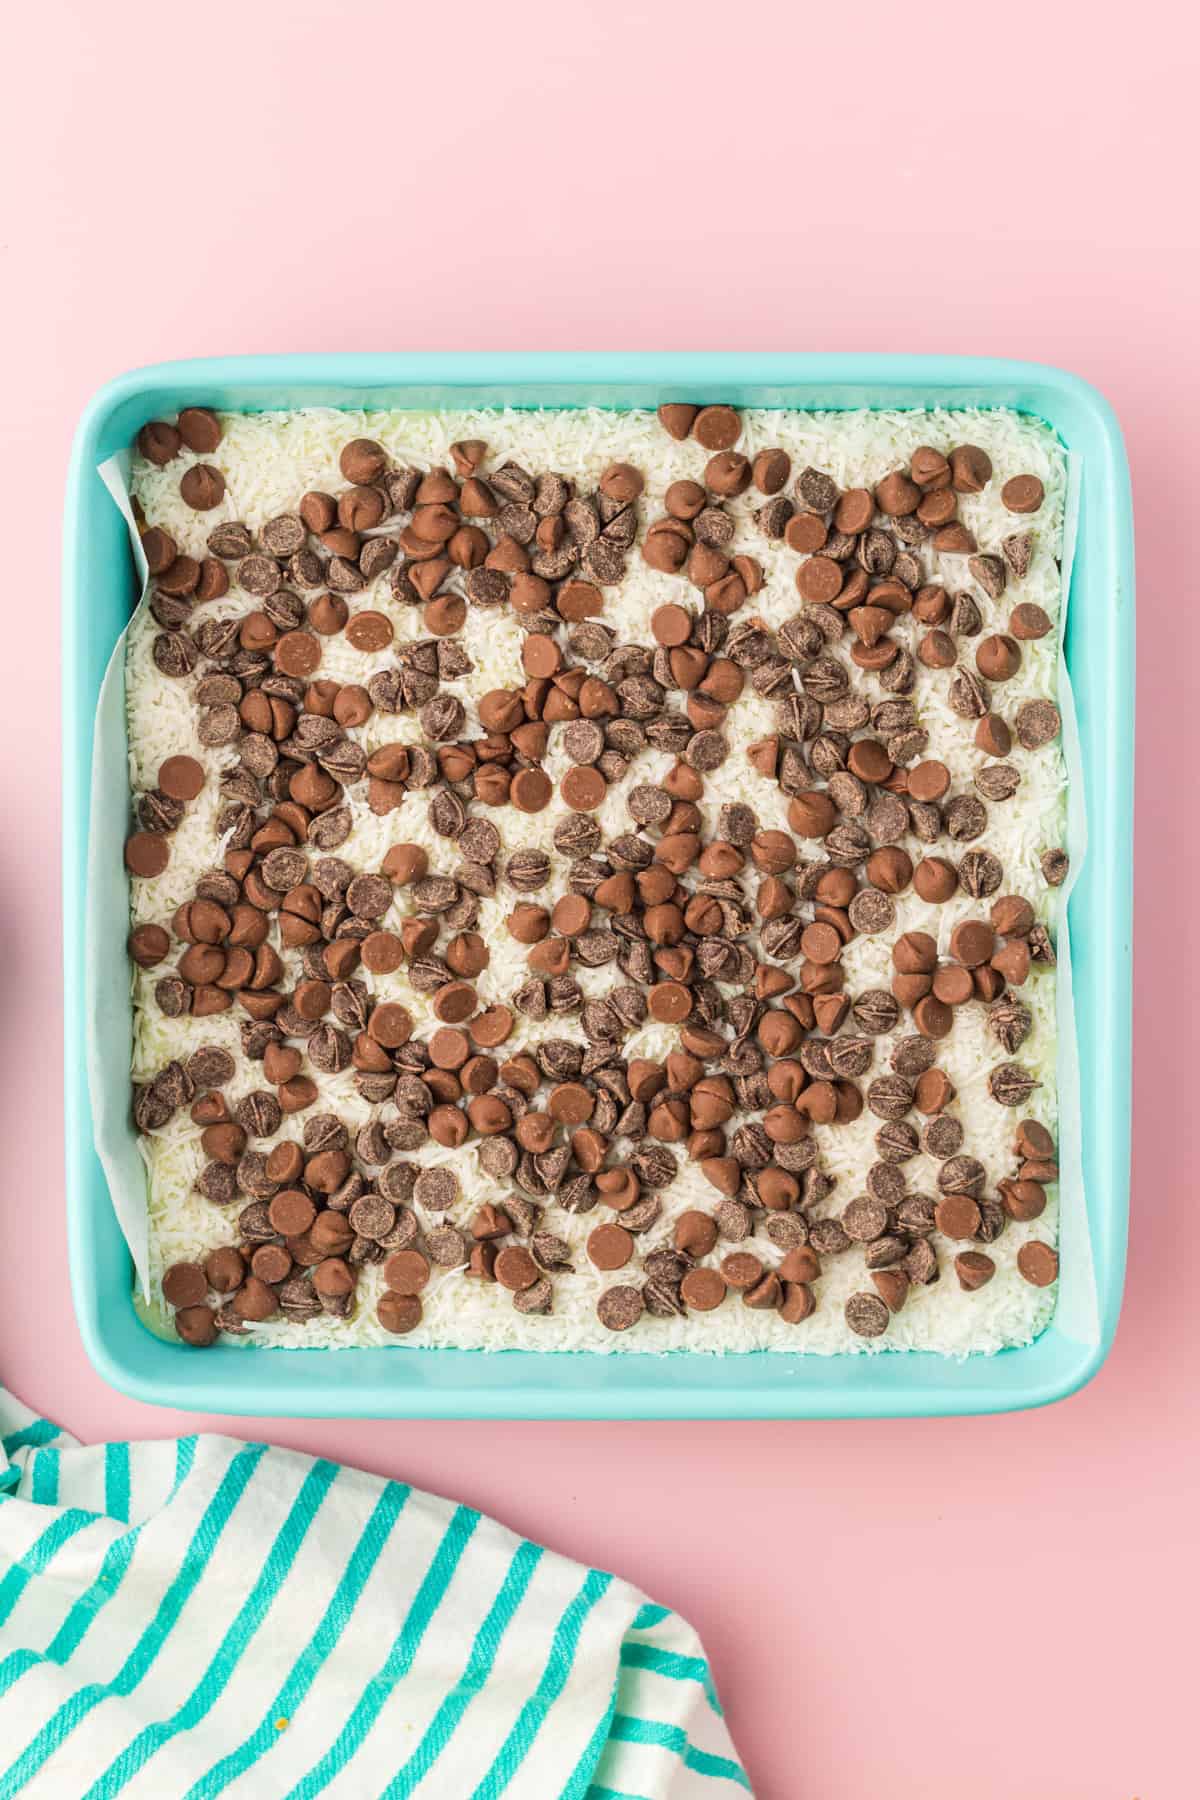 Square casserole dish with shredded coconut topped with chocolate chips.